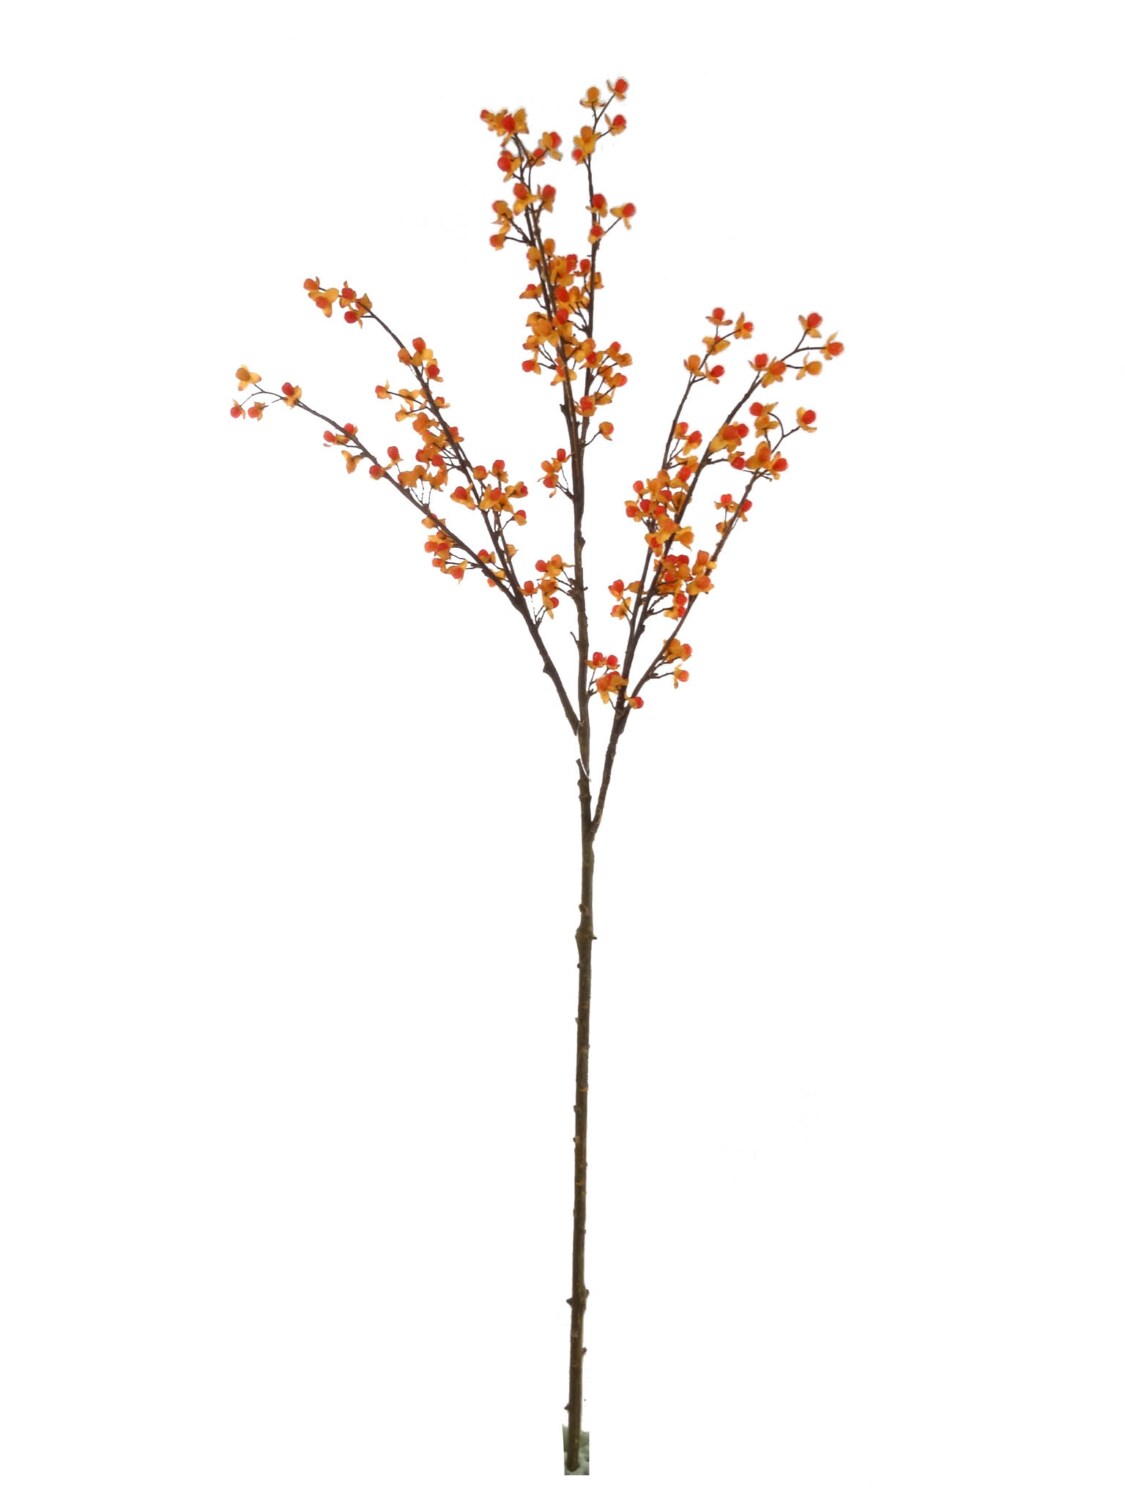 Radiant Set of 12 38&#x22; Bittersweet Spray - Stunning Fall Floral D&#xE9;cor | Lifelike Artificial Bittersweet Branches | Versatile Autumn Accent | Perfect for Seasonal Arrangements &#x26; Home Decorating